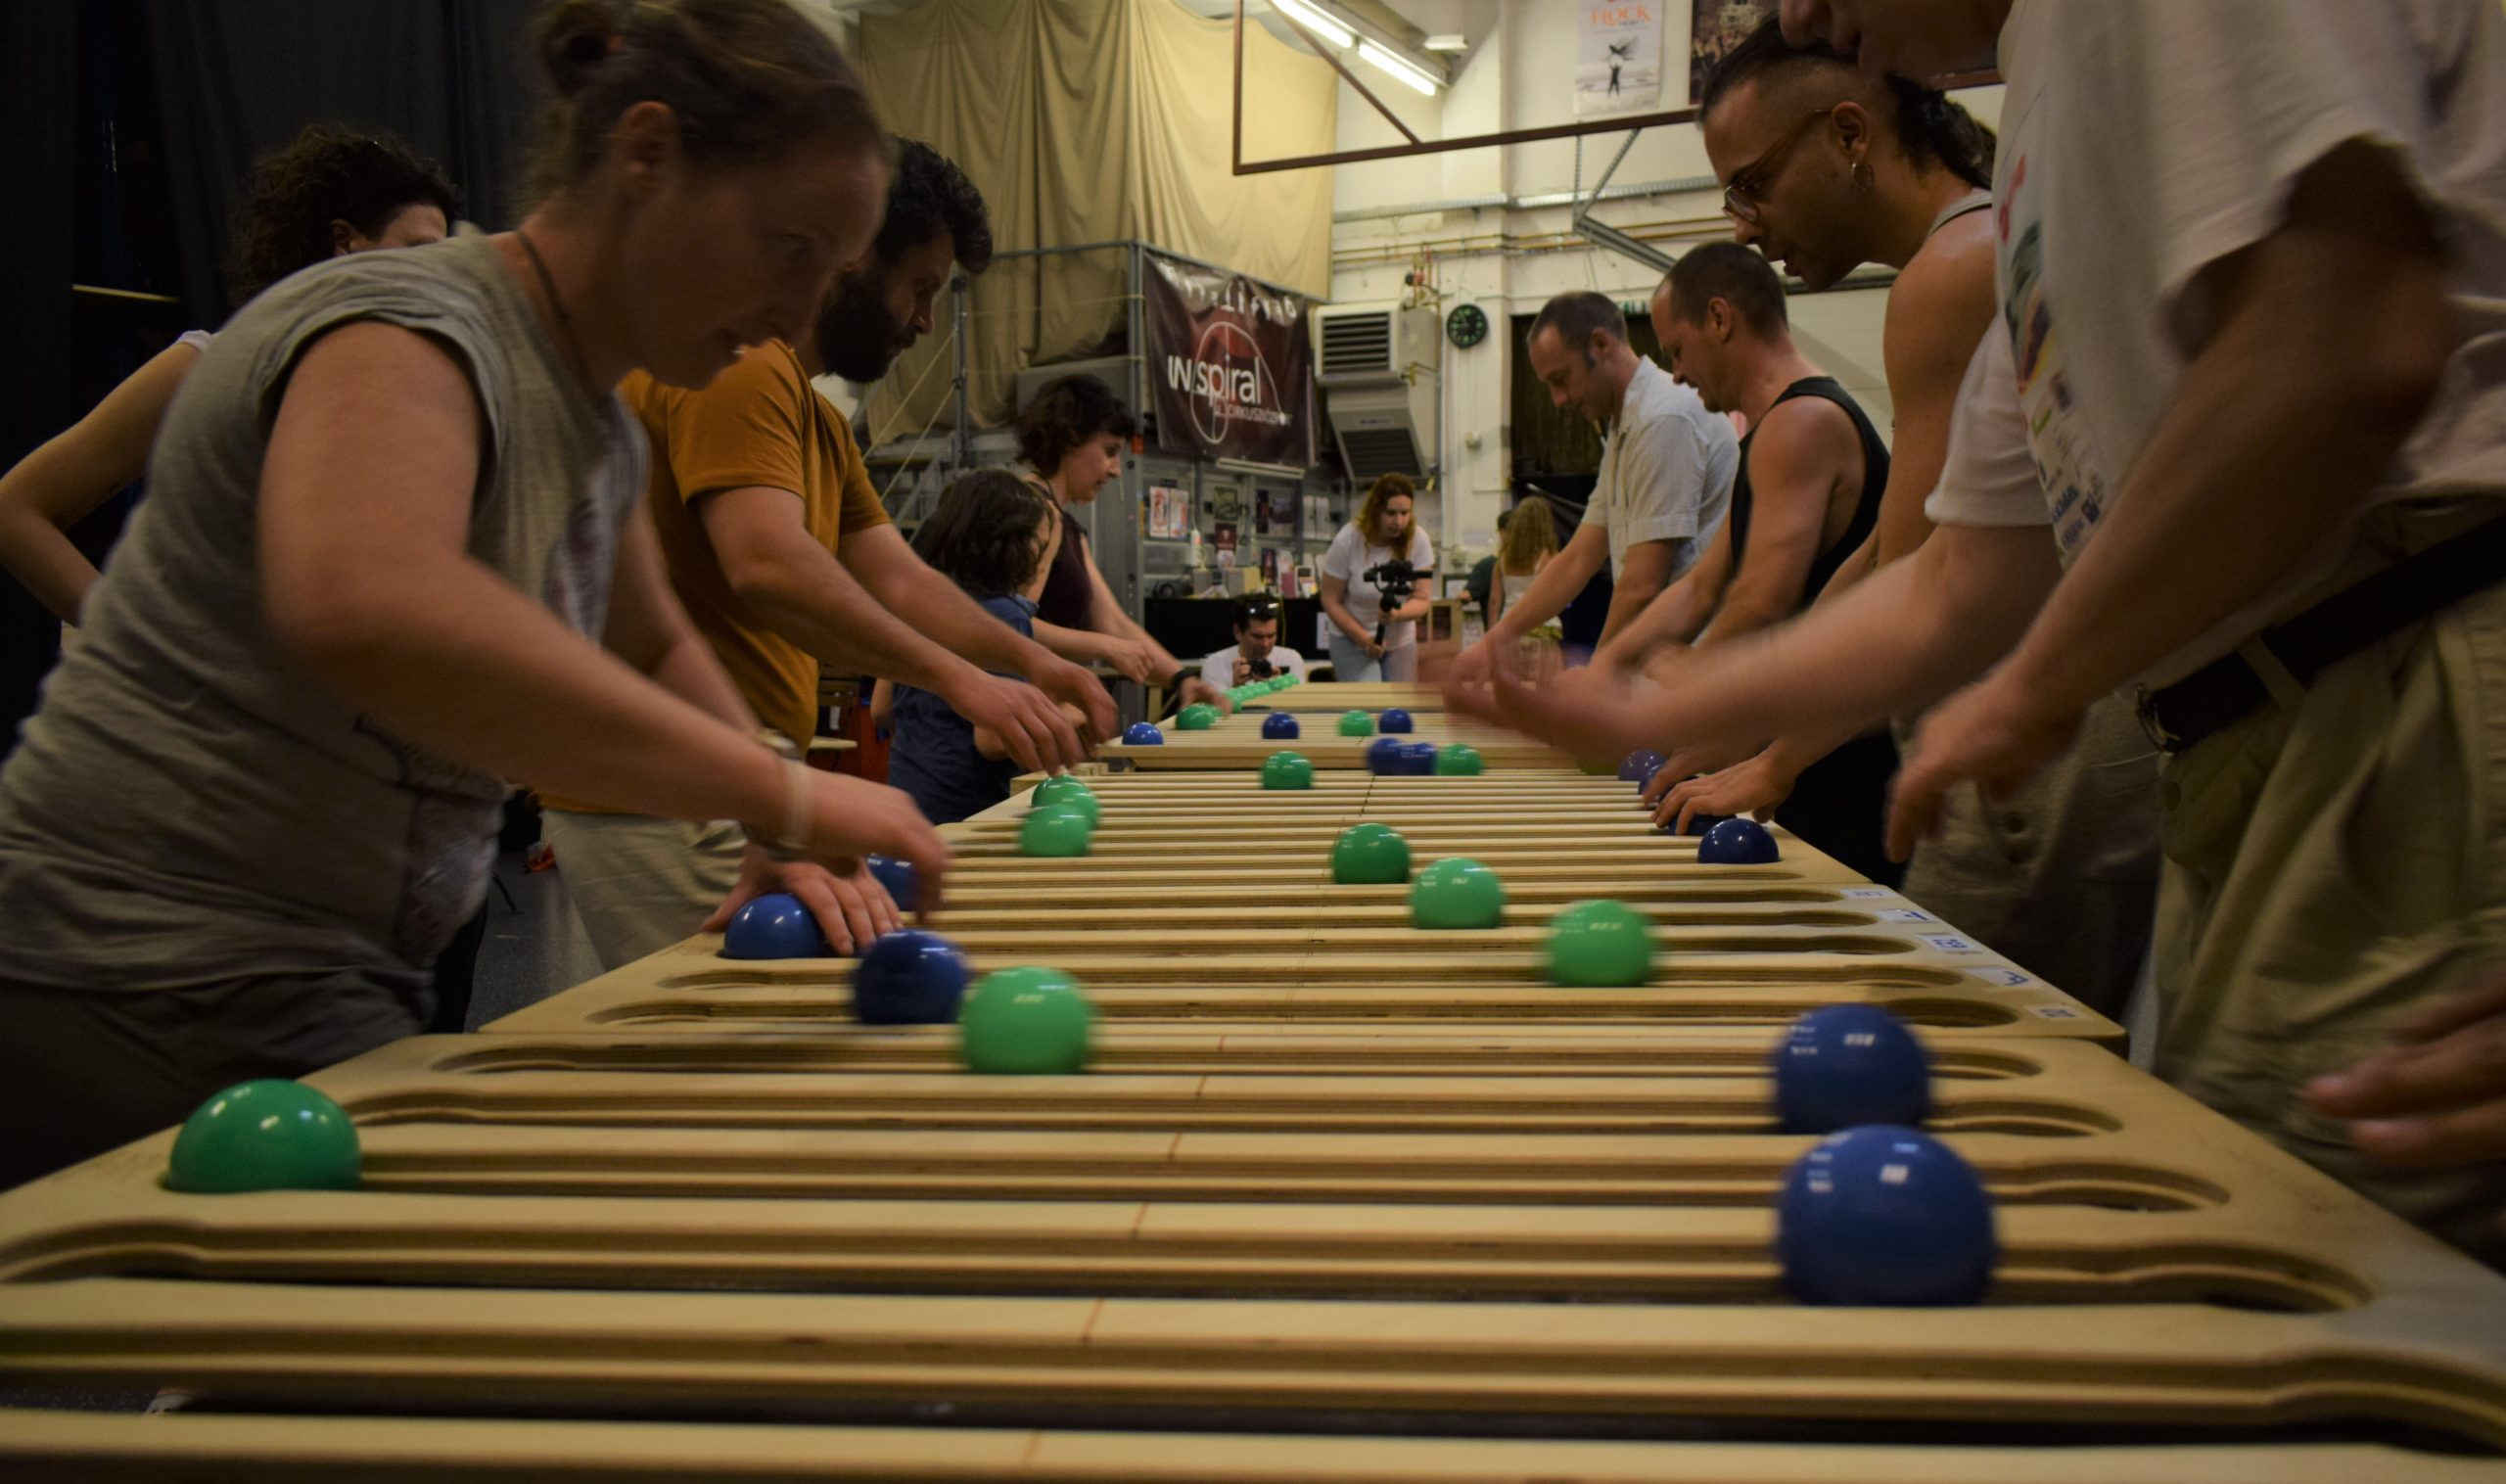 Functional Juggling practitioners stand side-by-side around Quat Prop rectangular juggling boards. This convention took place inside the INspiral Circus Center